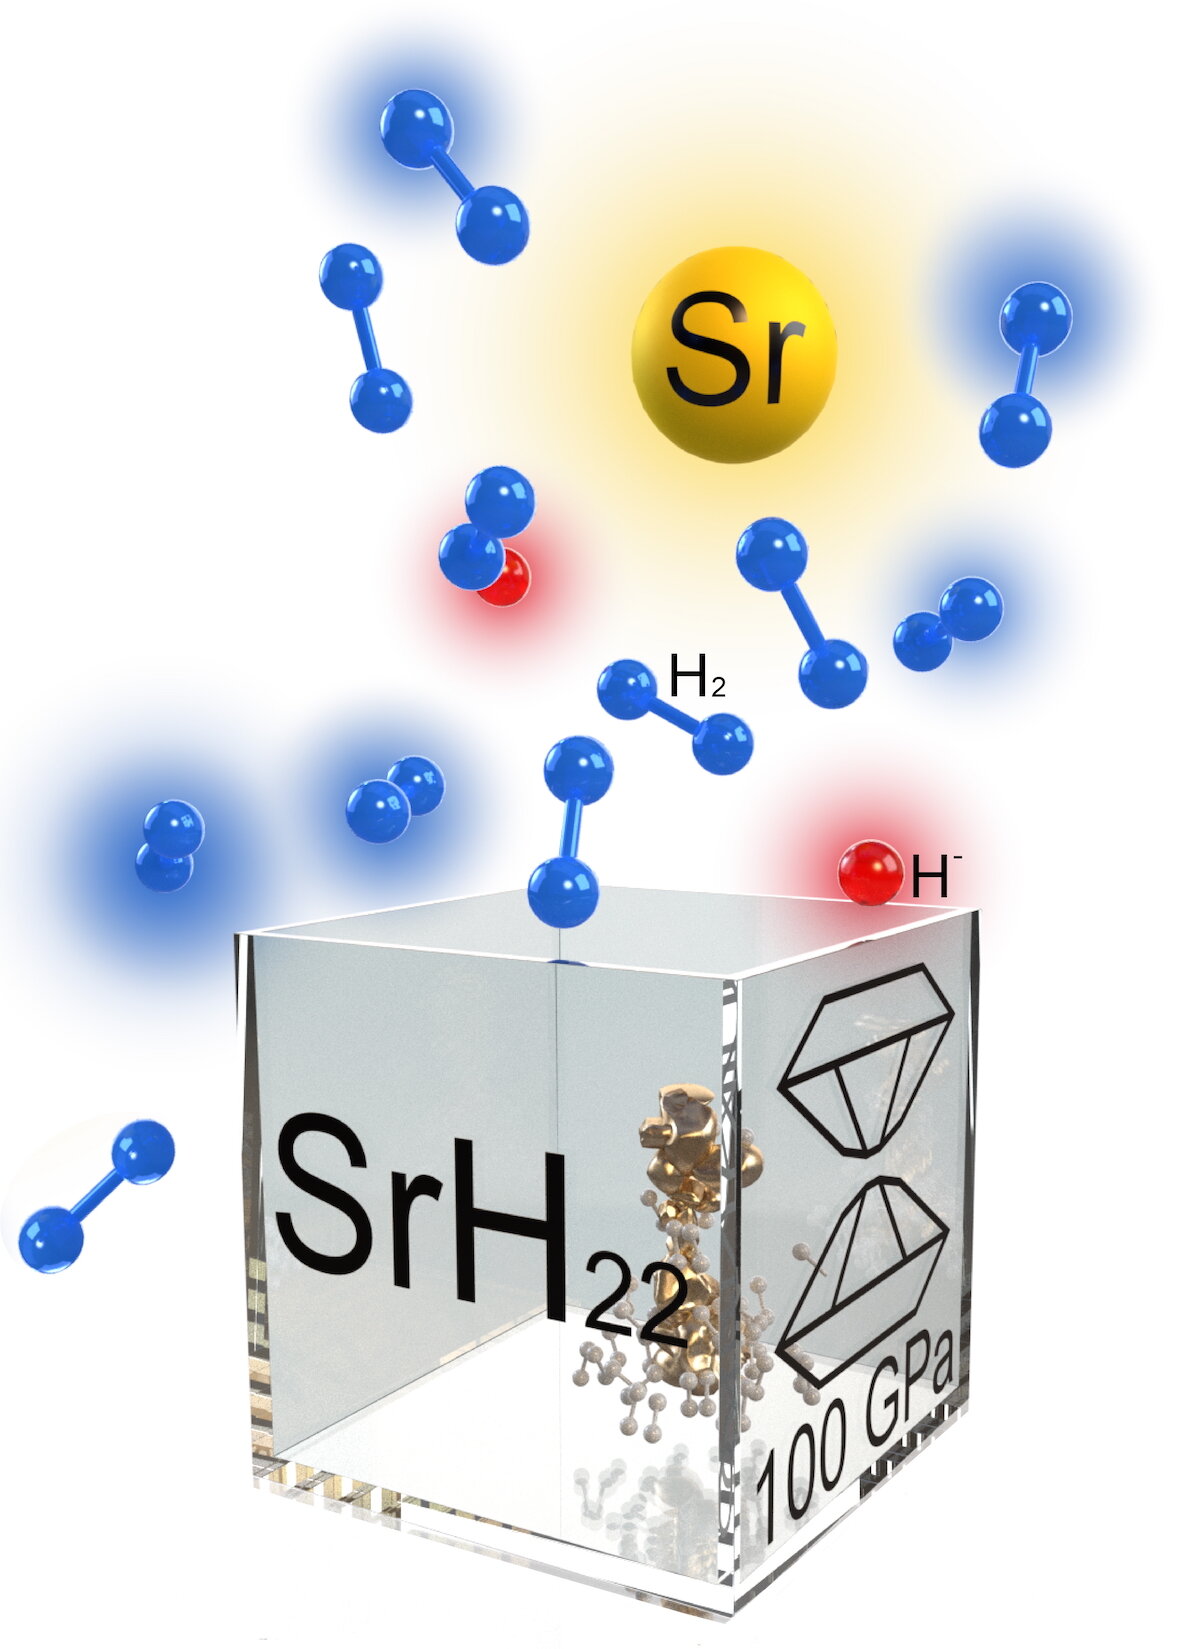 Superionic compound with the highest hydrogen content successfully predicted and explored - Phys.org